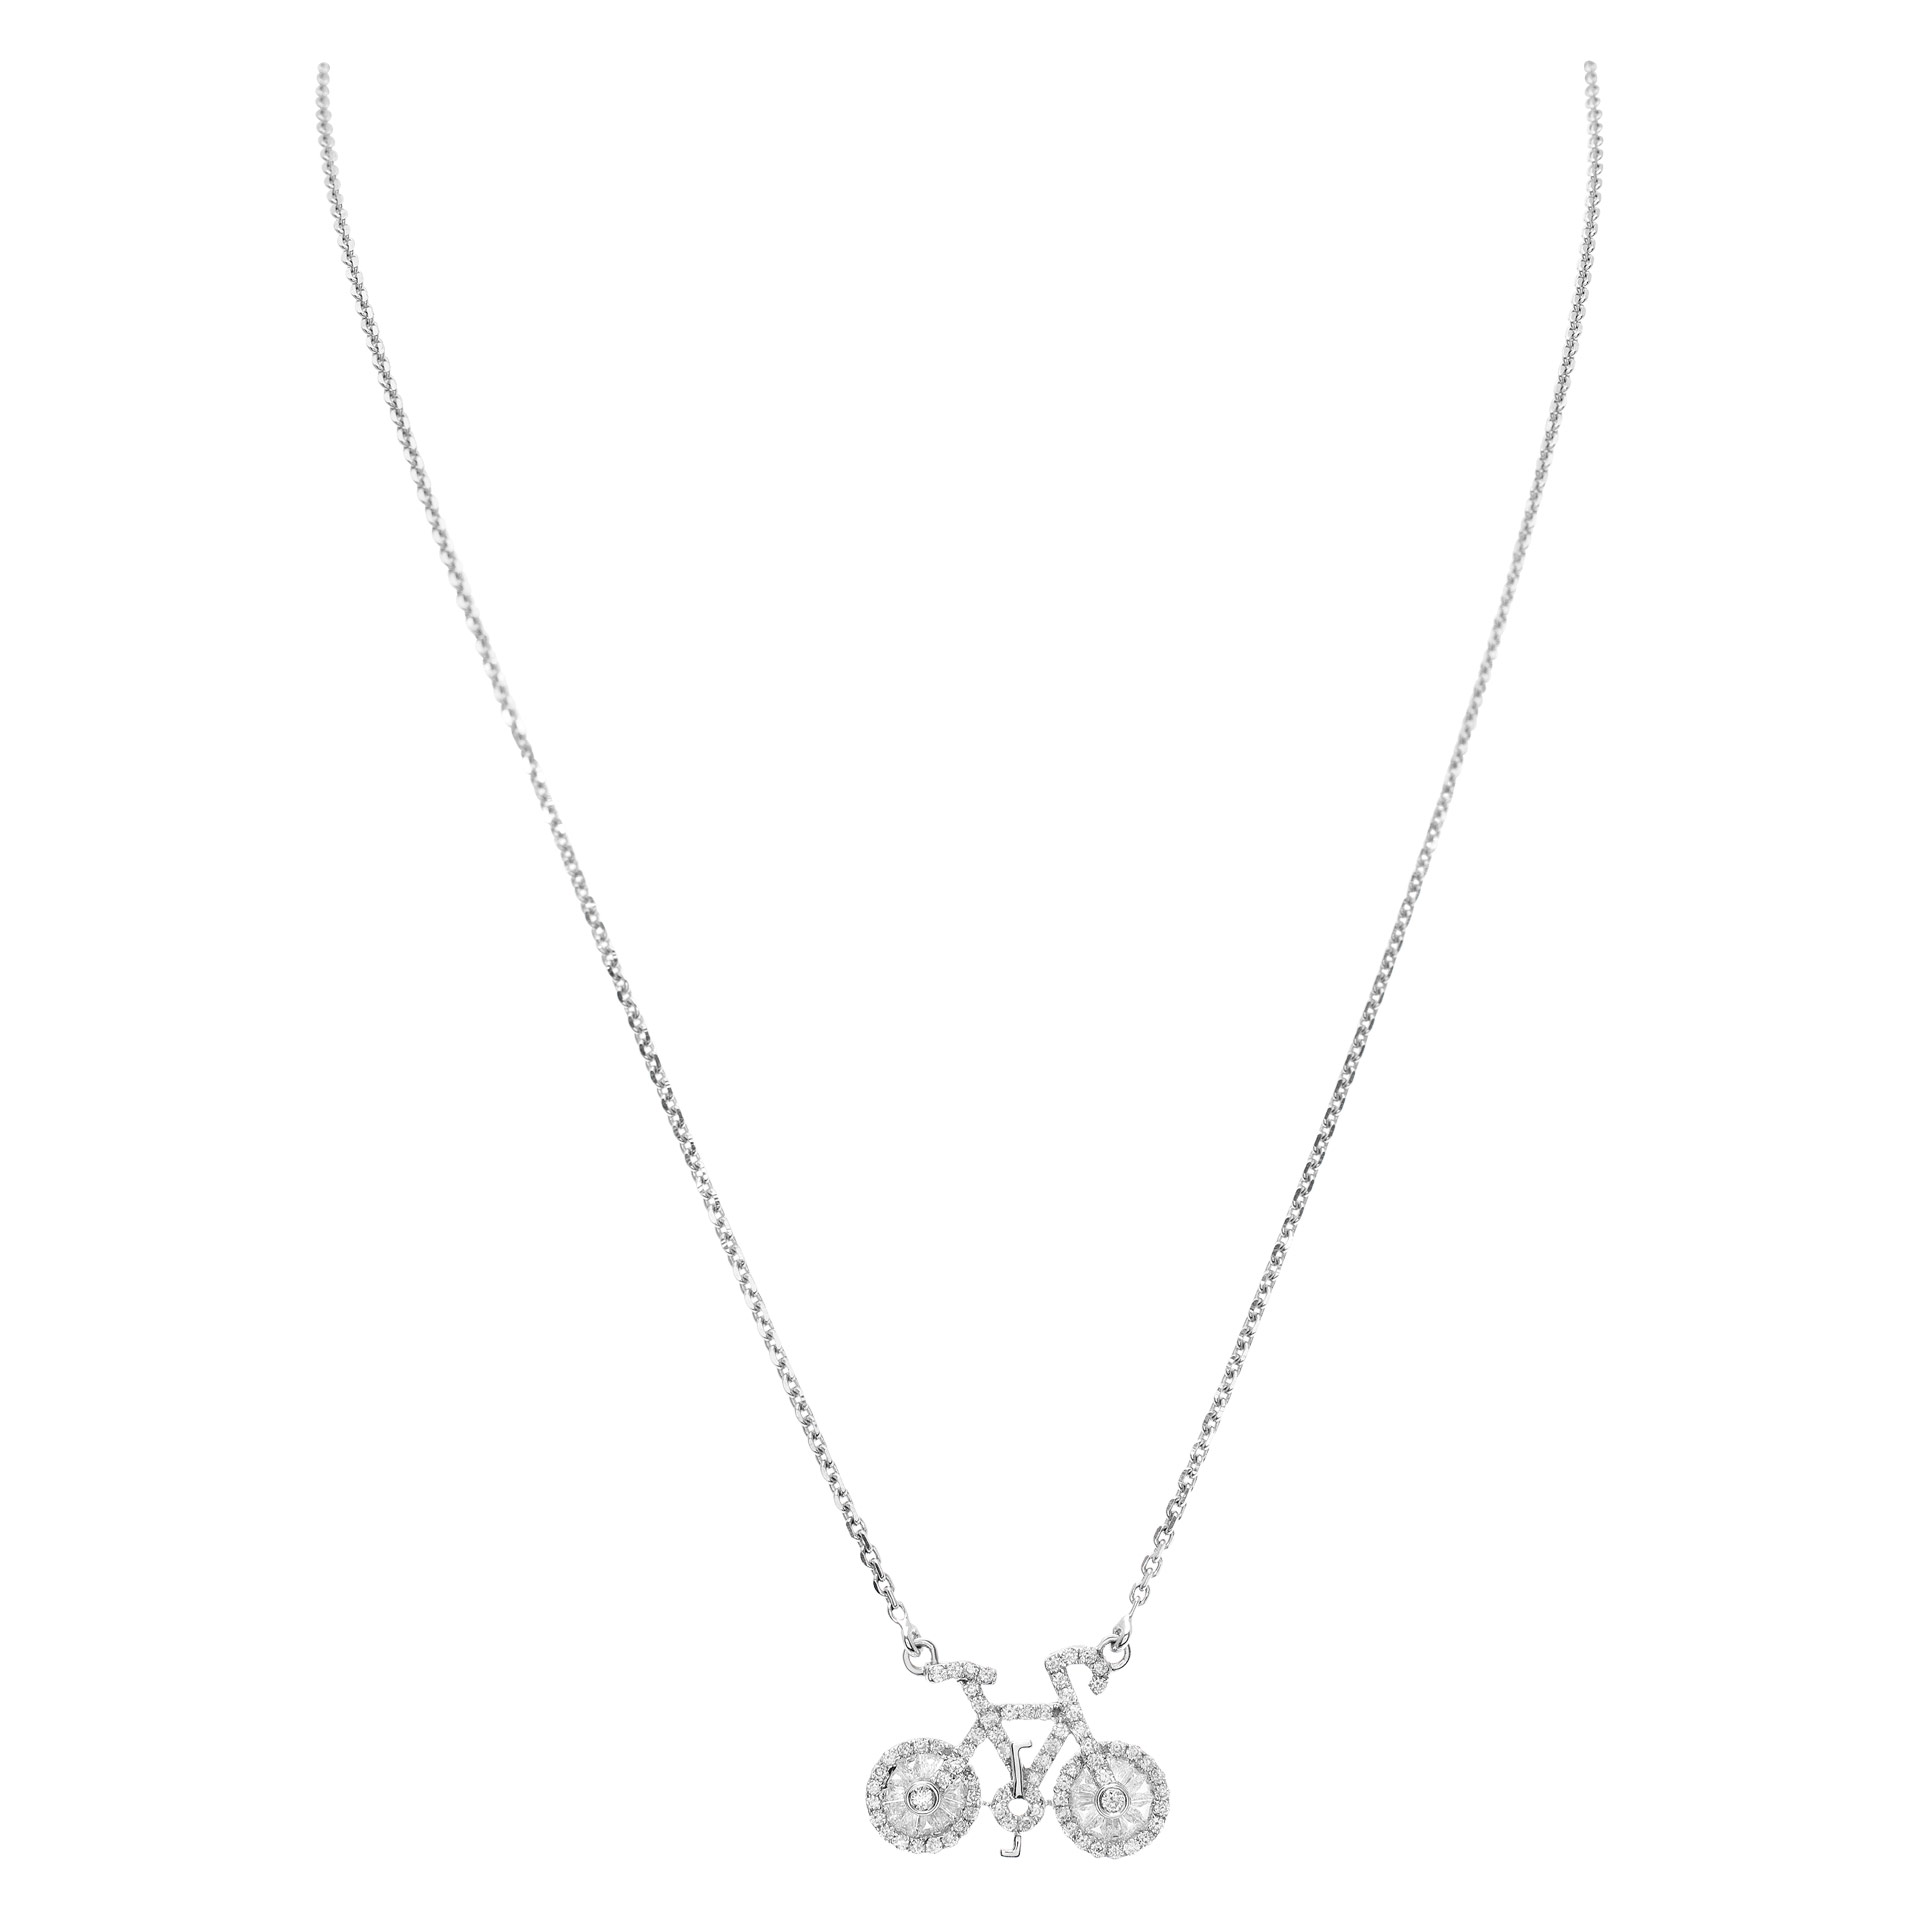 Bicycle pendant in 18k white gold